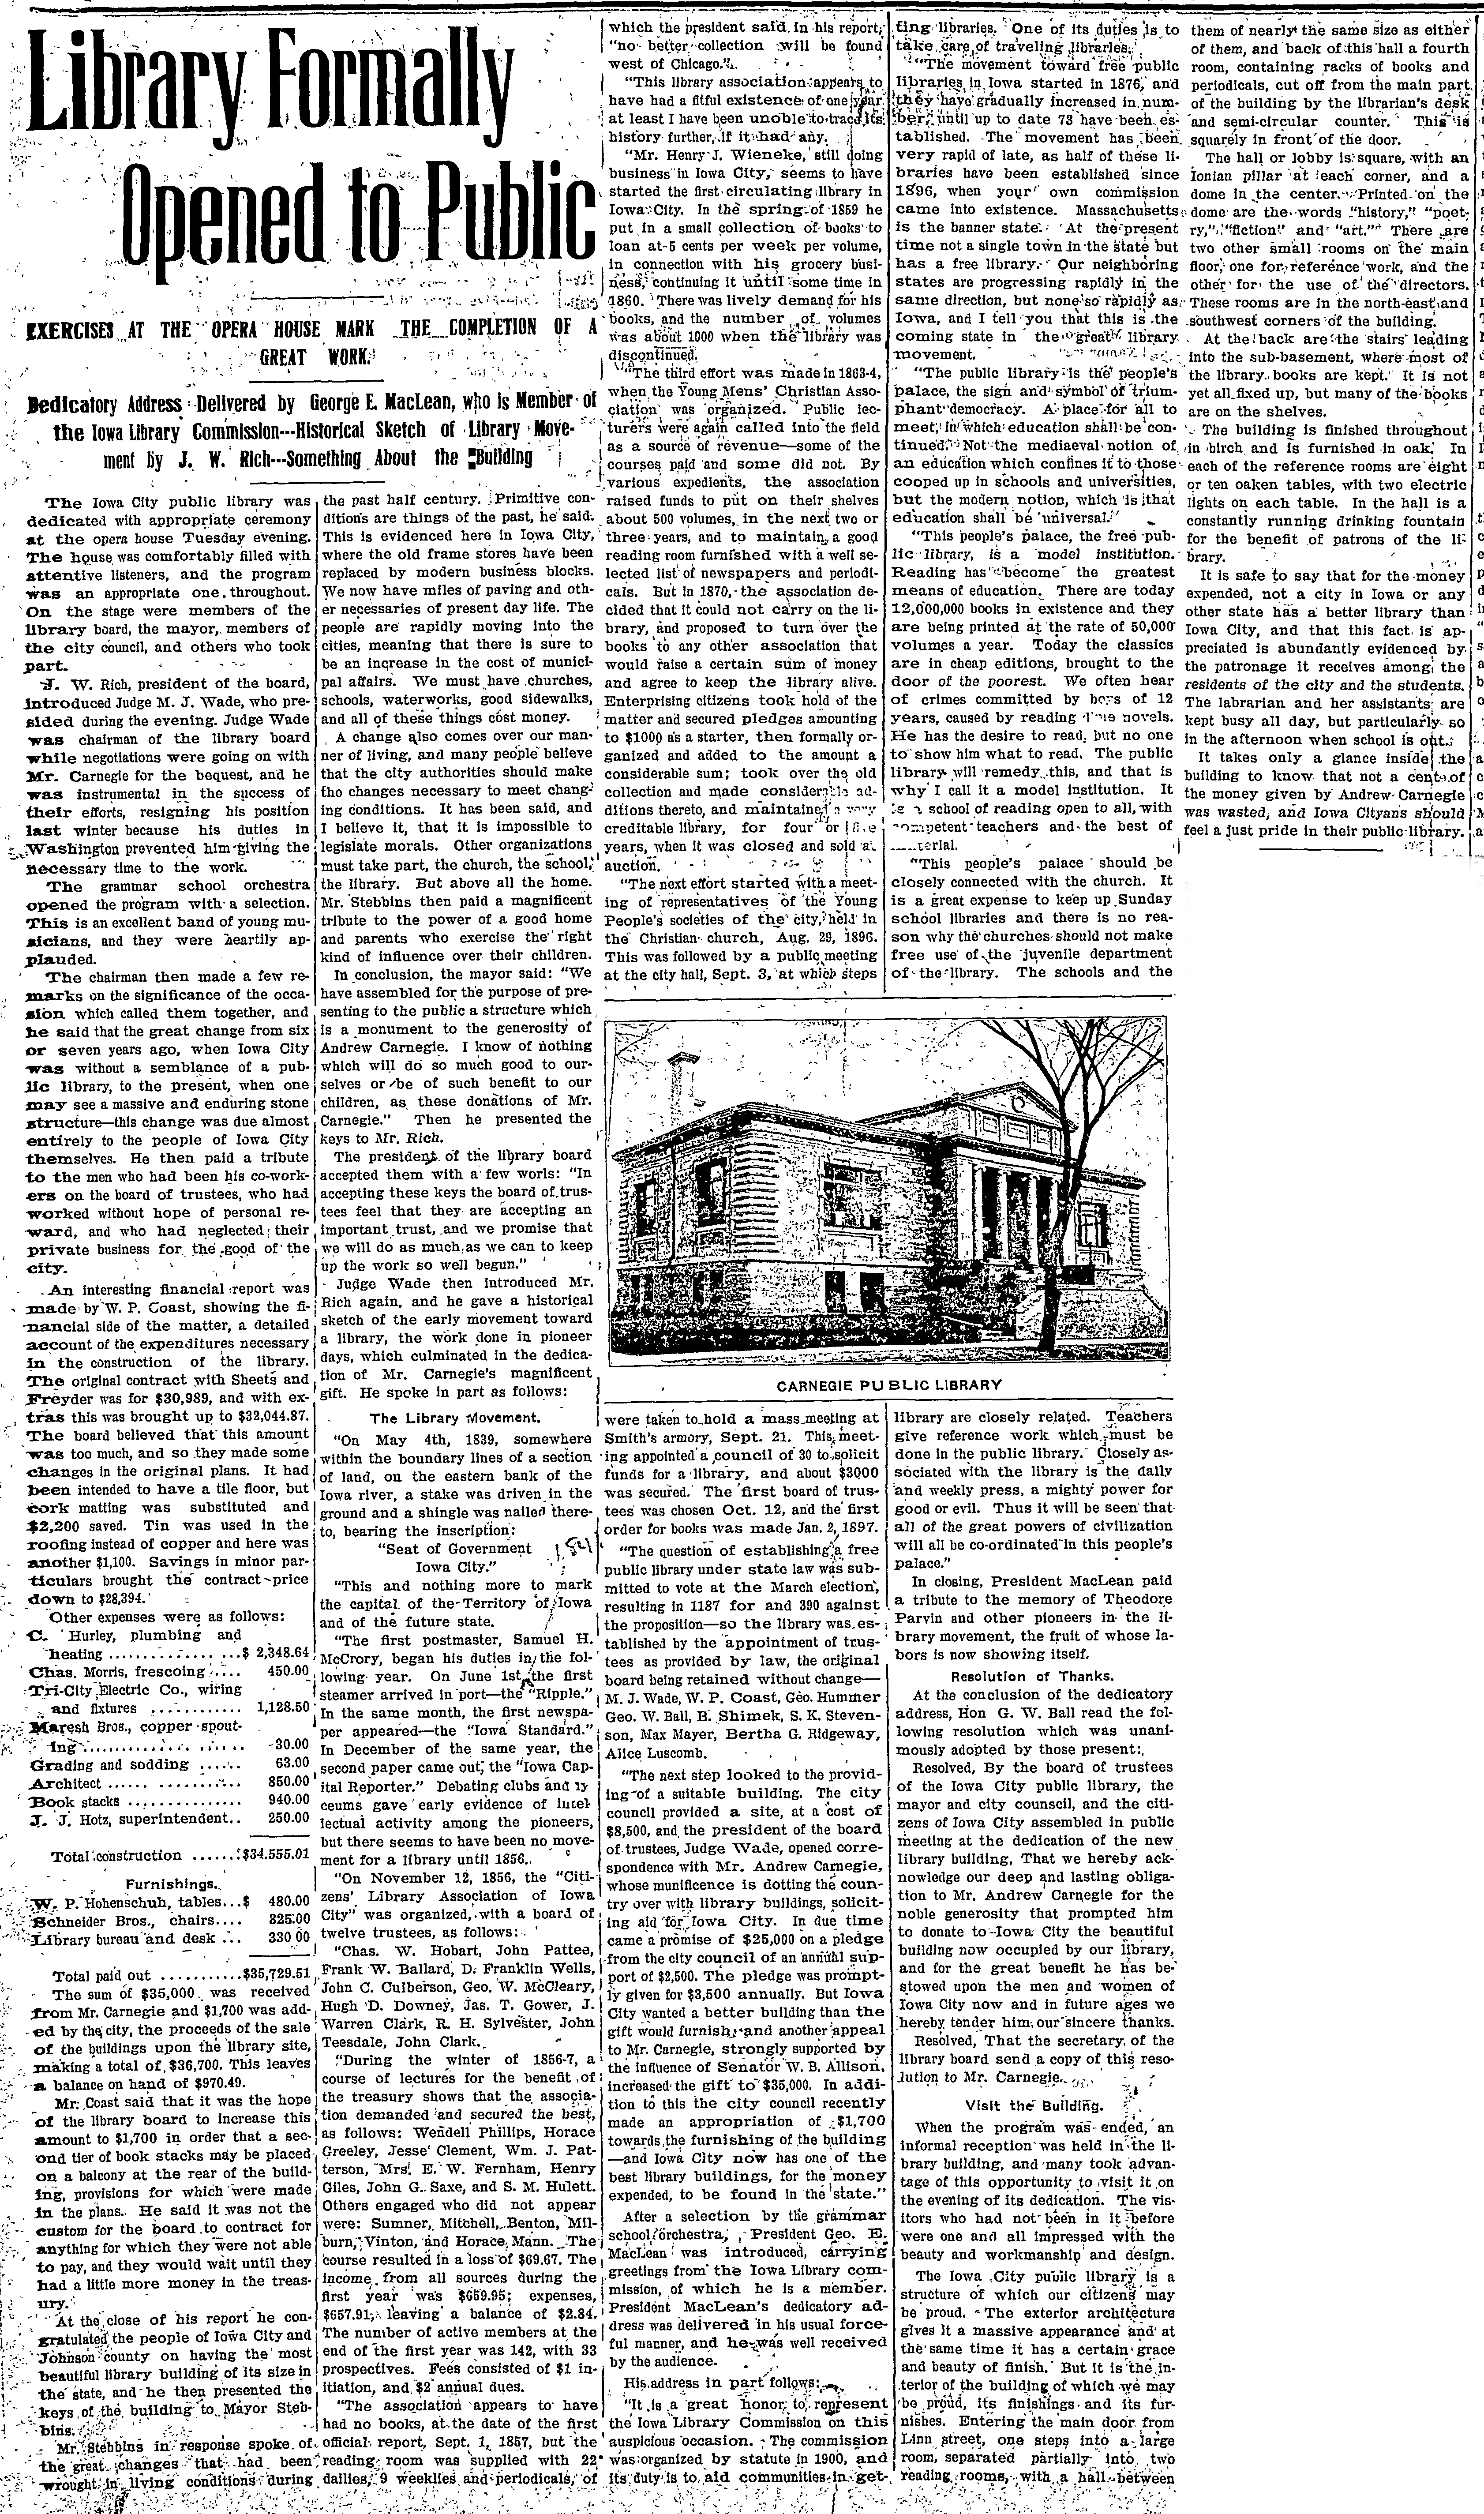 Newspaper article describing the Carnegie library dedication and the features of the new building